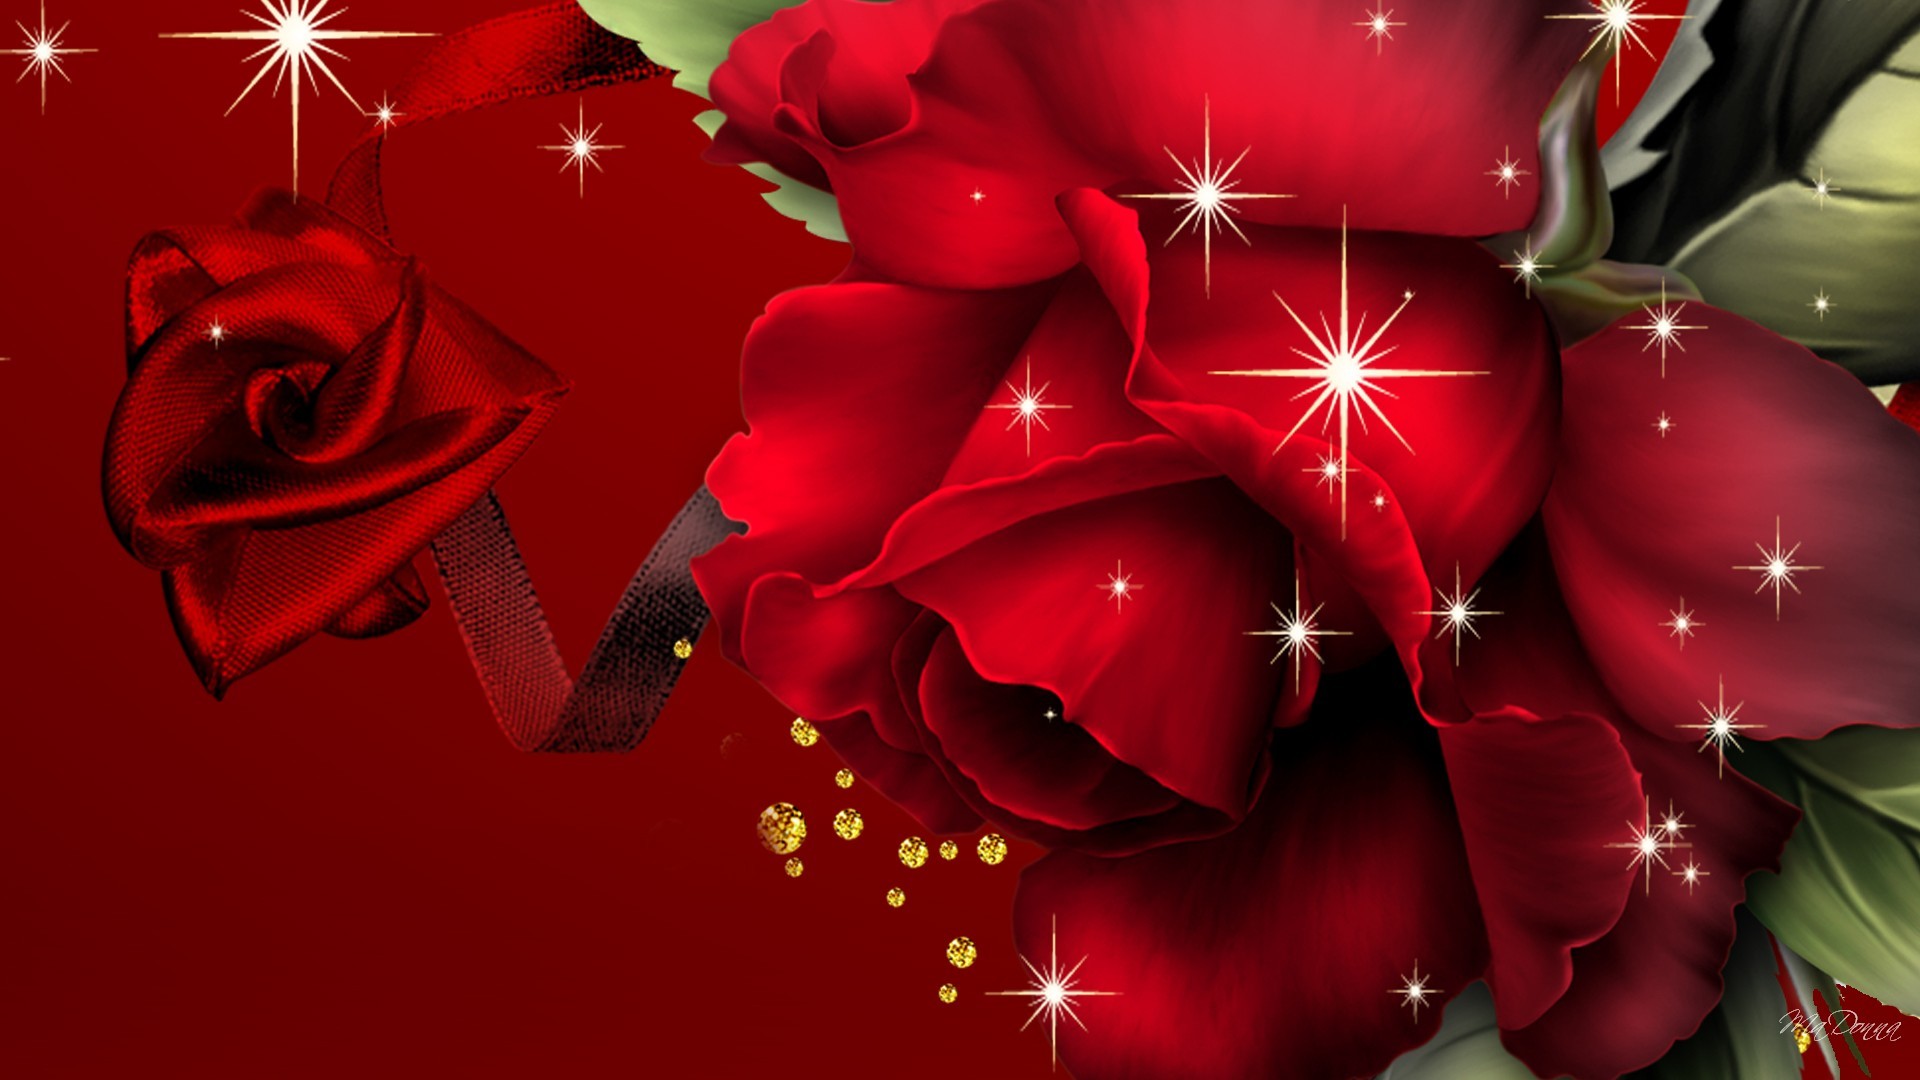 Red Roses Free Wallpapers Hd Top 
 Data Src Cool Roses - Rose Wallpaper Hd - HD Wallpaper 